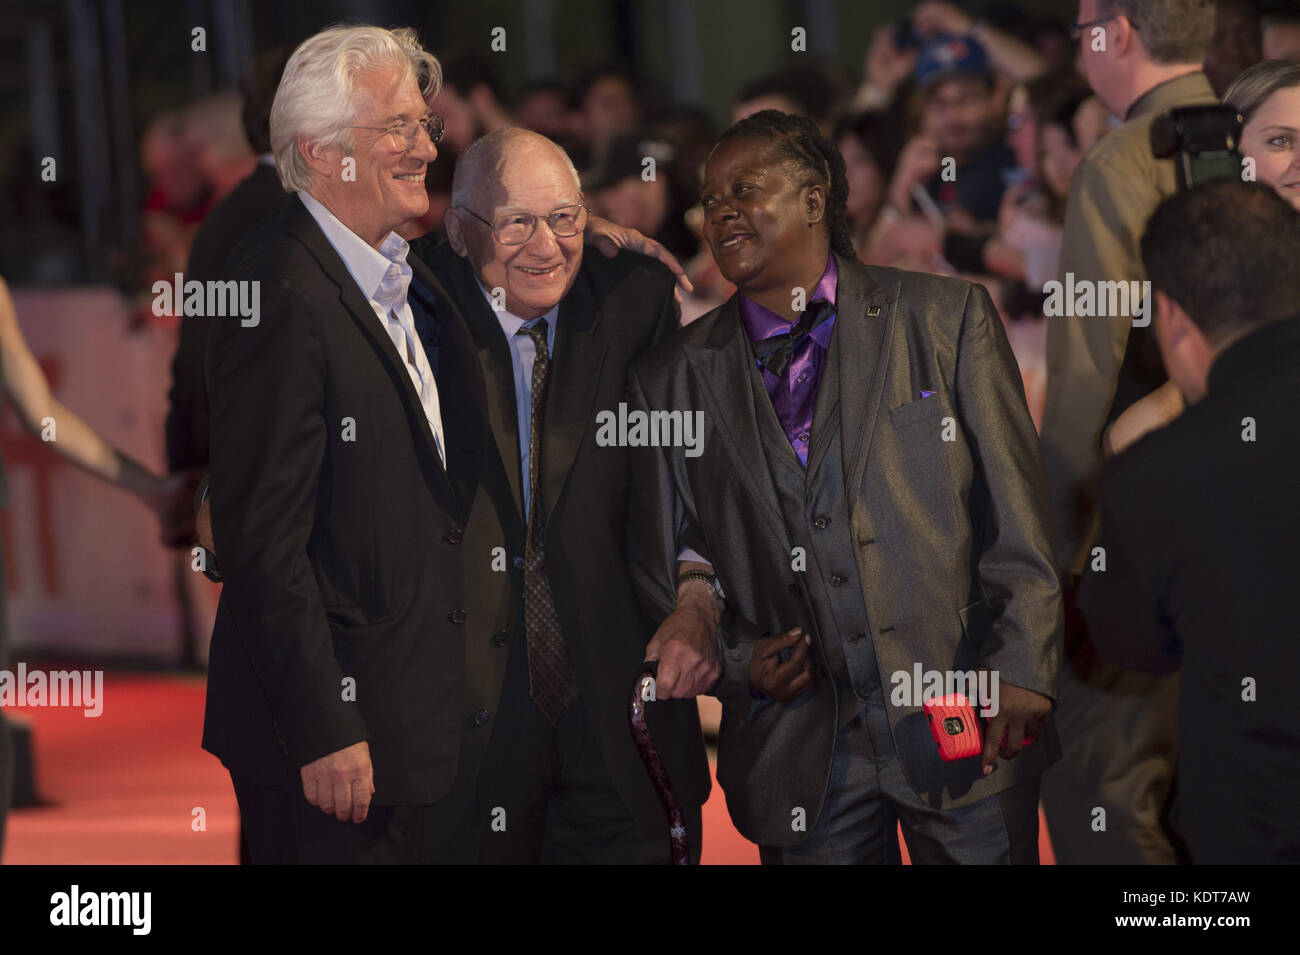 Directors and actors attend a premiere for 'Three Christs' at the  42nd Toronto International Film Festival (TIFF) in Toronto, Canada.  Featuring: Richard Gere, Homer George Gere Where: Toronto, Canada When: 14 Sep 2017 Credit: Euan Cherry/WENN.com Stock Photo